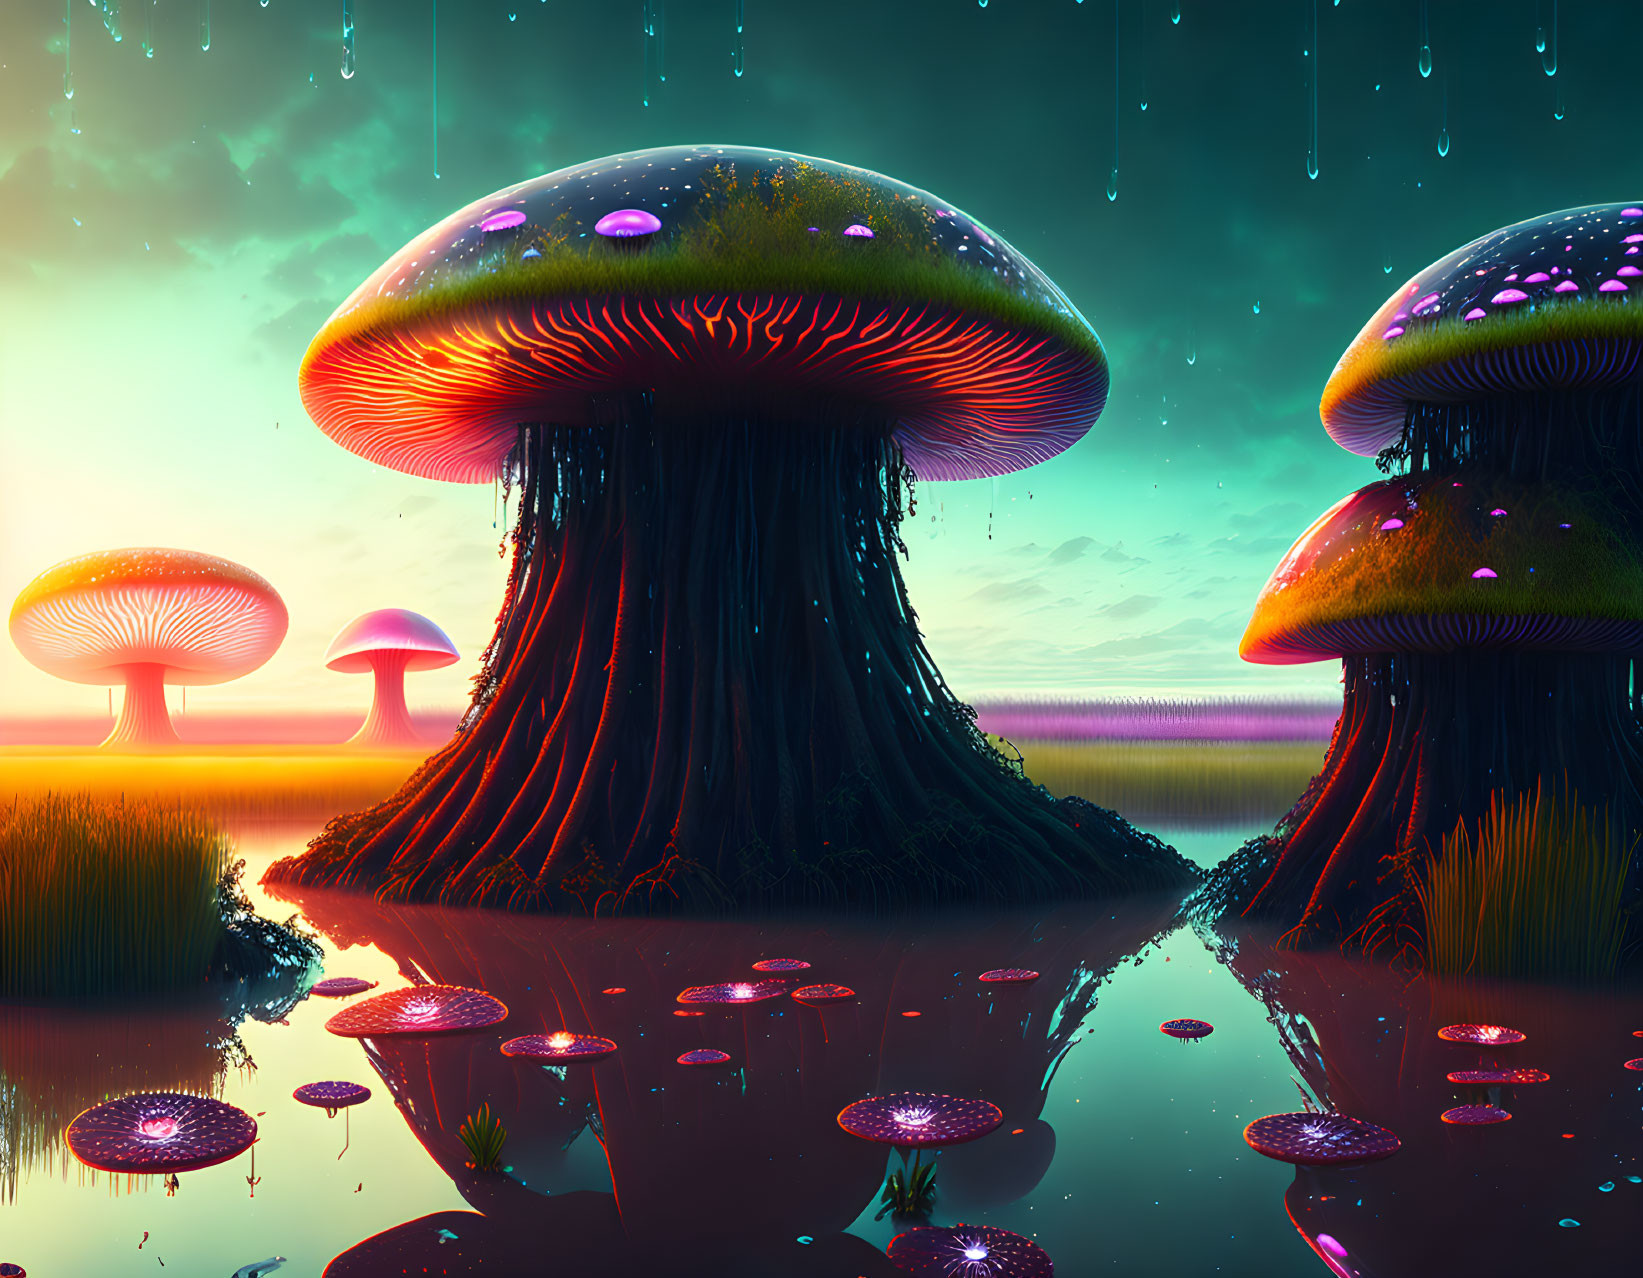 Bioluminescent mushrooms in fantasy landscape with twilight sky and water reflection